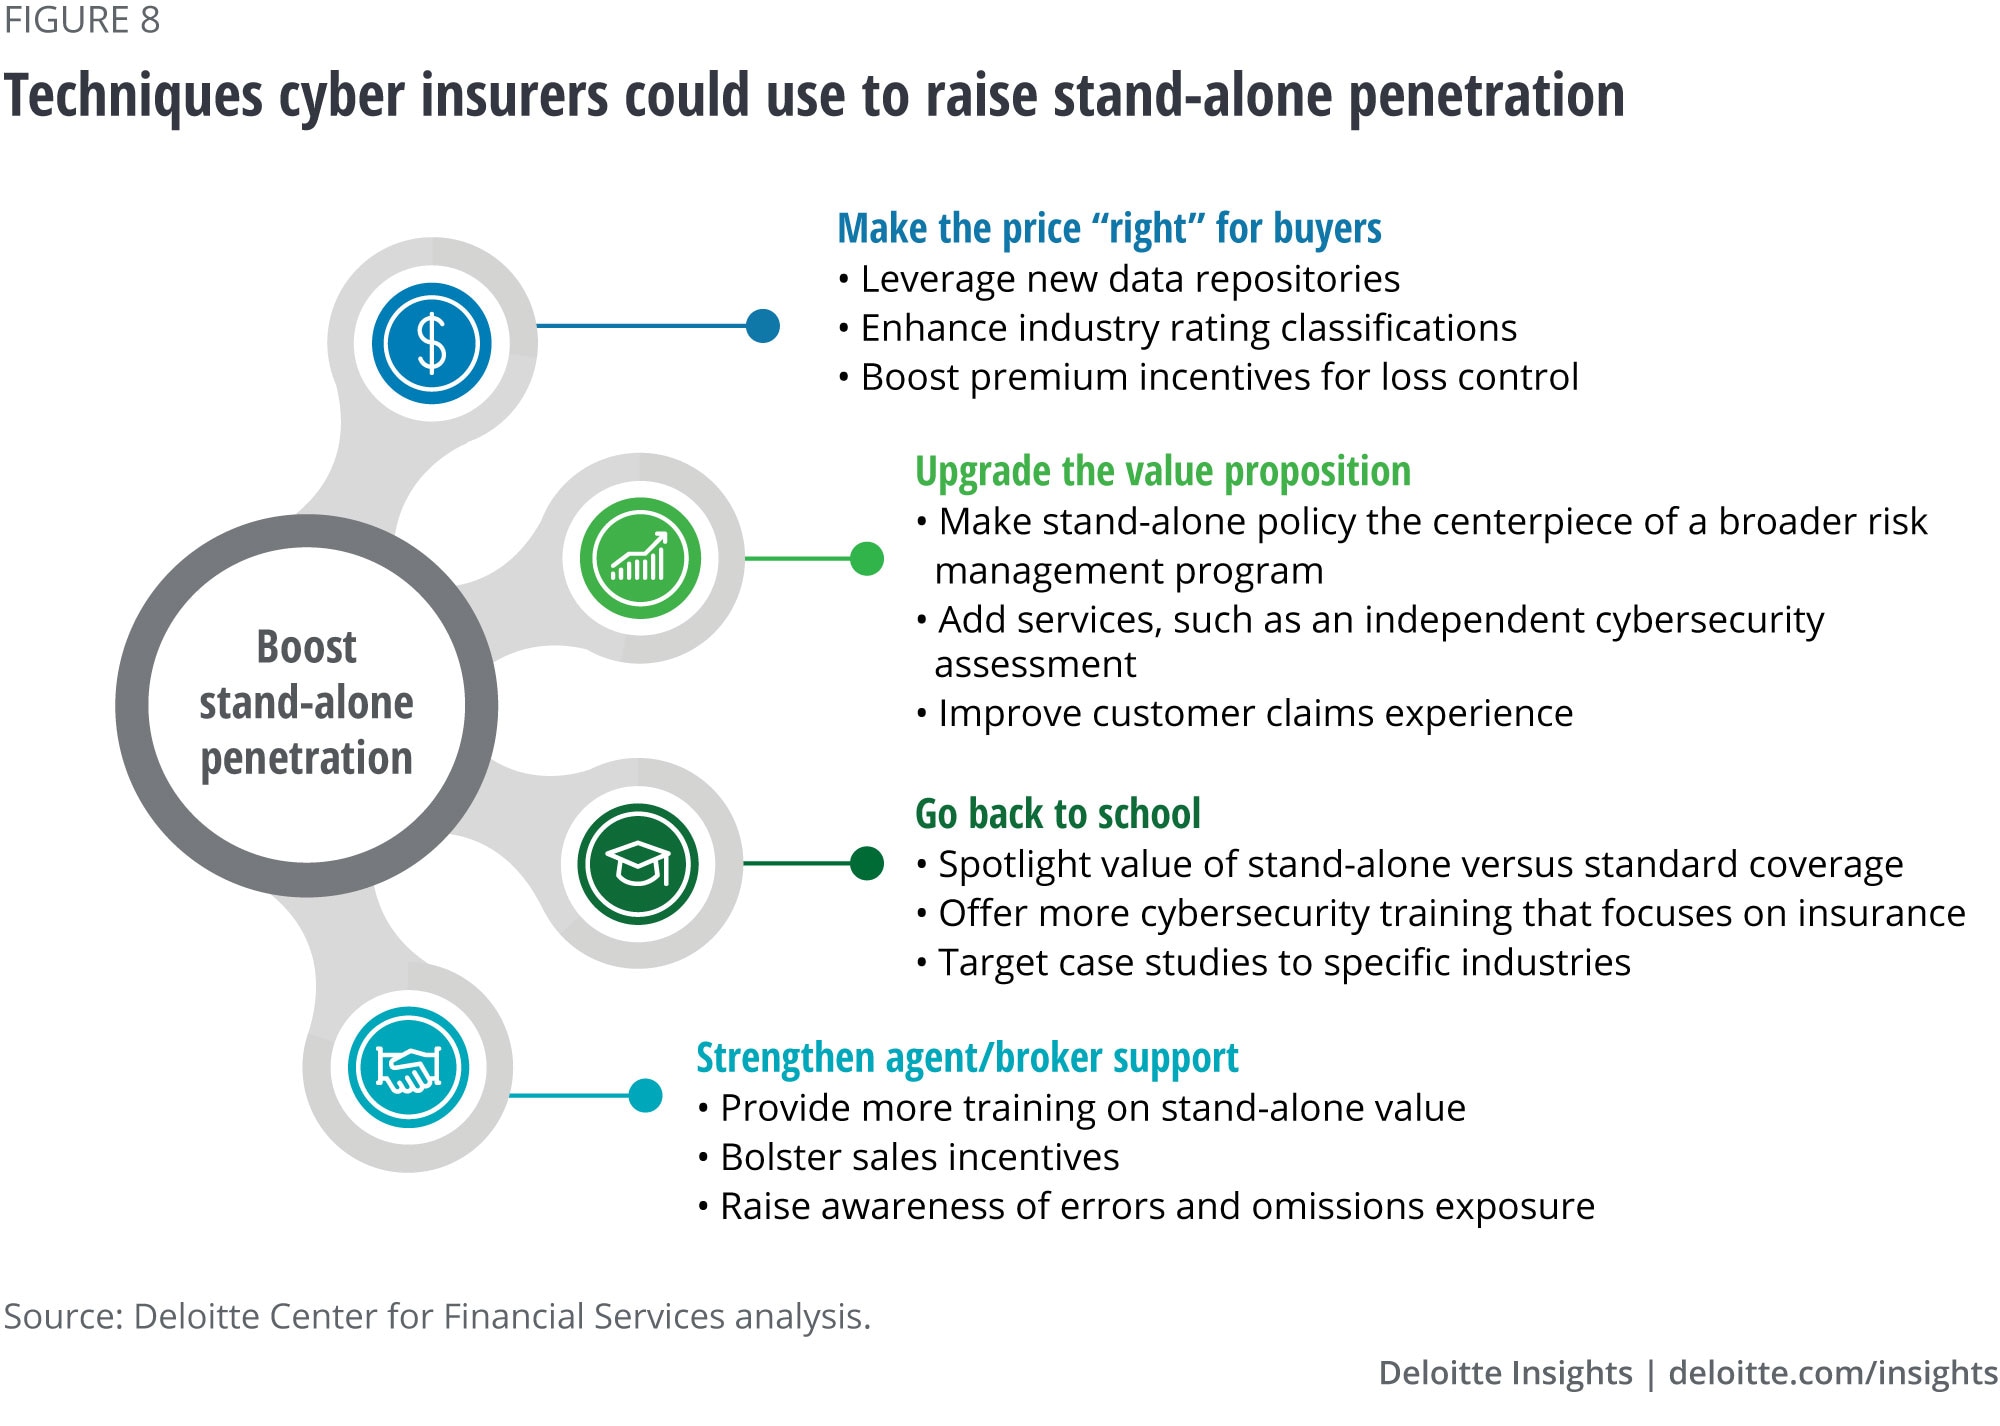 Techniques cyber insurers could use to raise standalone penetration